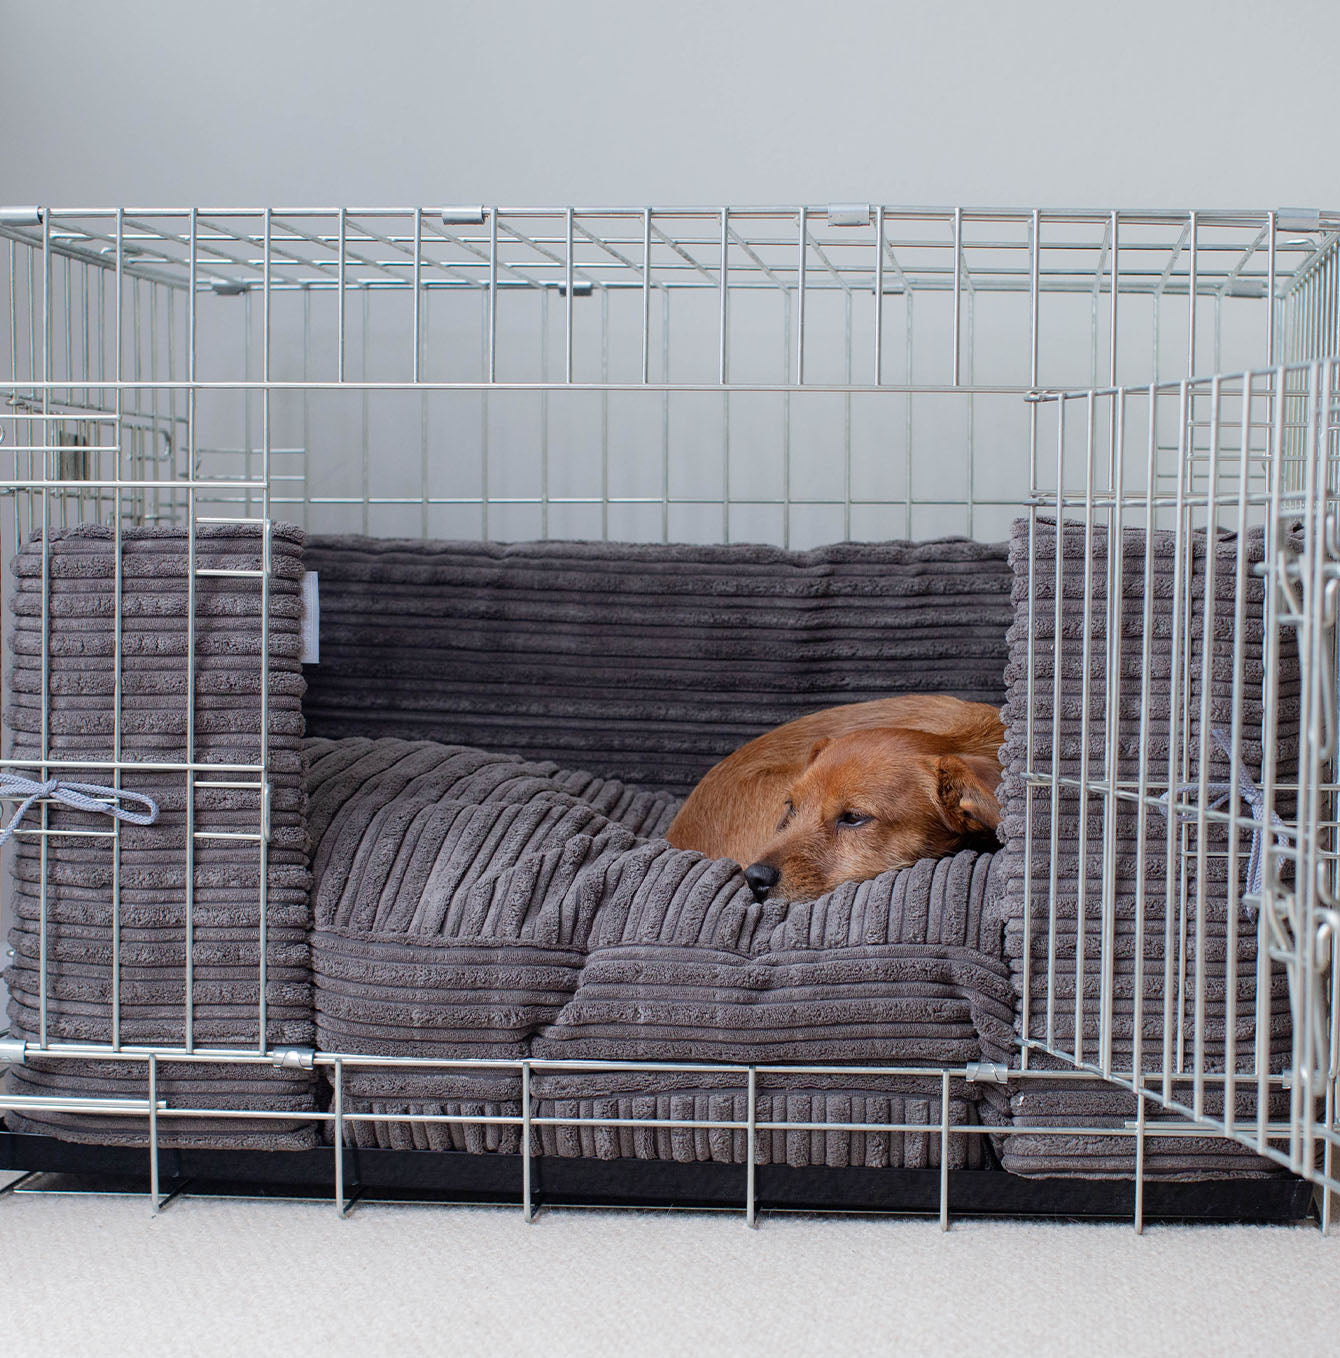 Luxury Dog Cage Bumper, Essentials Plush Cage Bumper in Dark Grey The Perfect Dog Cage Accessory, Available To Personalize Now at Lords & Labradors US